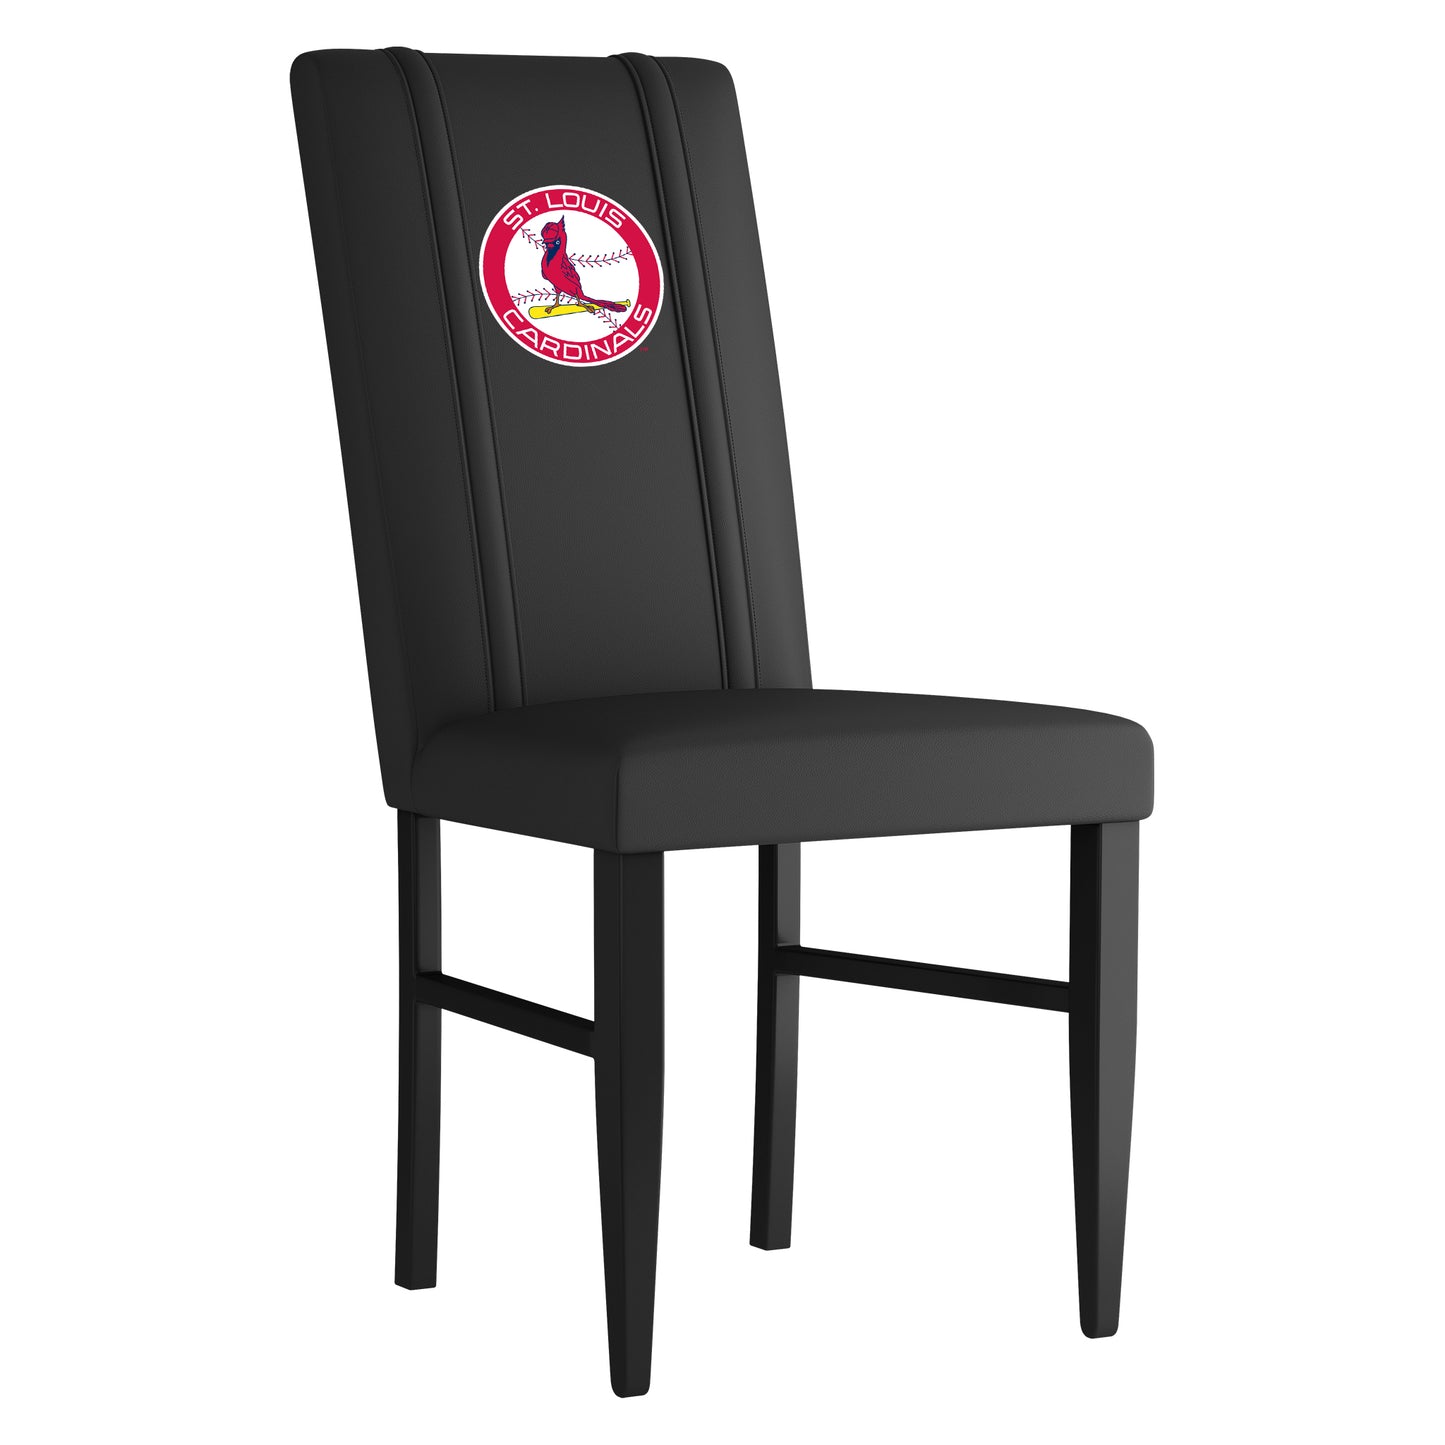 Side Chair 2000 with St Louis Cardinals Cooperstown Secondary Set of 2